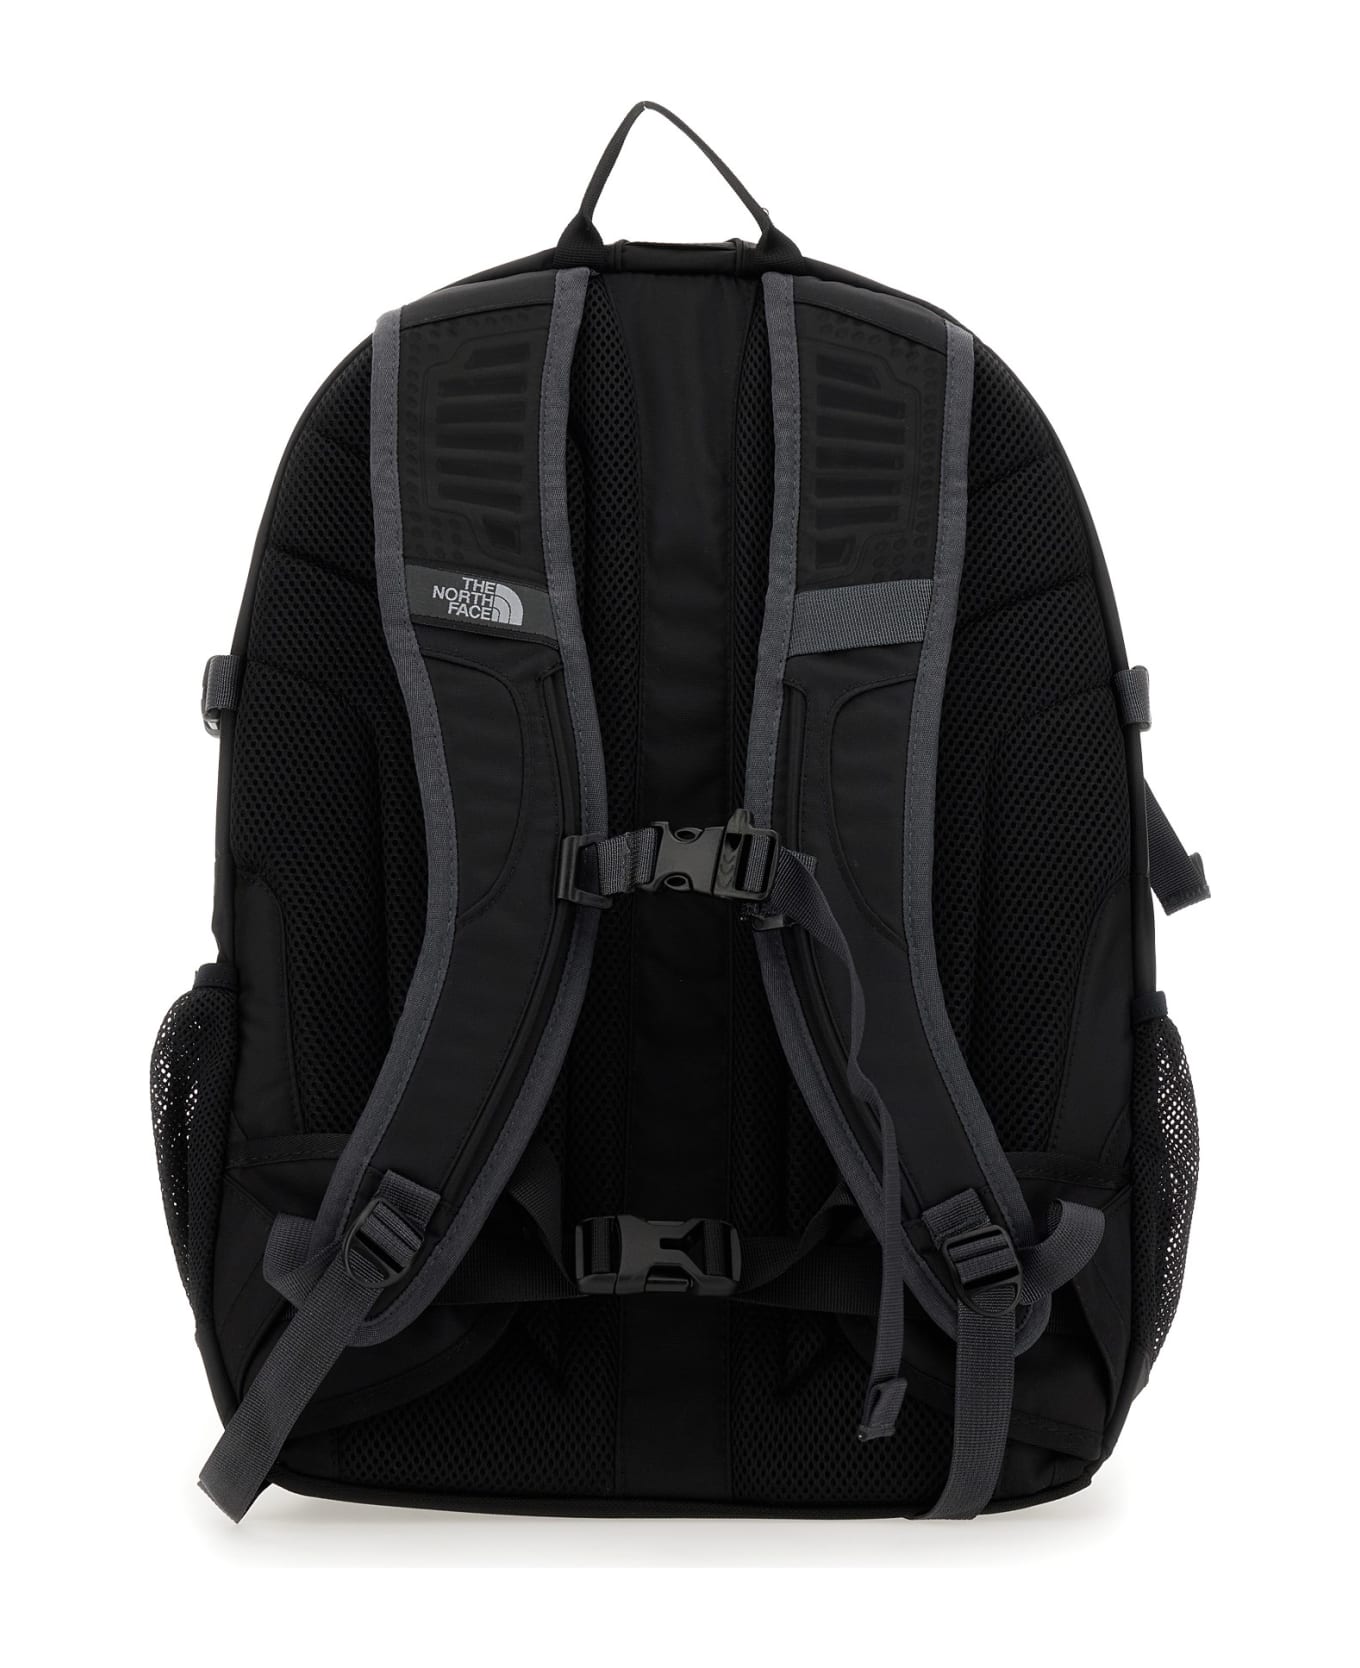 The North Face Borealis Classic" Backpack - NERO